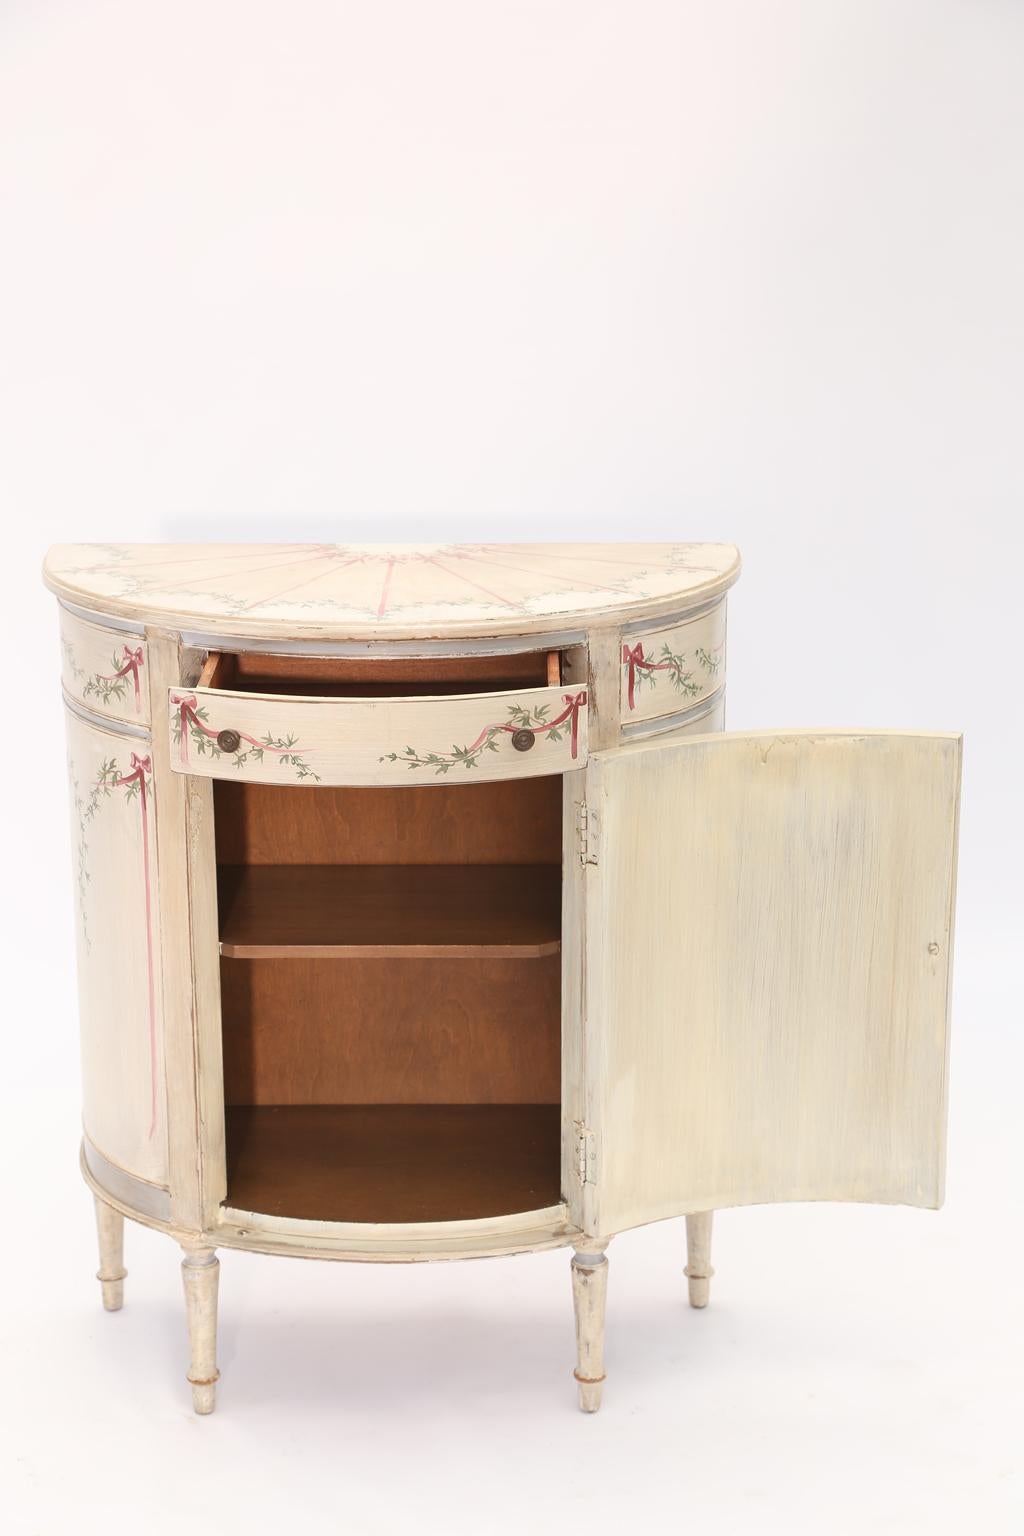 American Demilune Cabinet Hand-Painted with Dogs